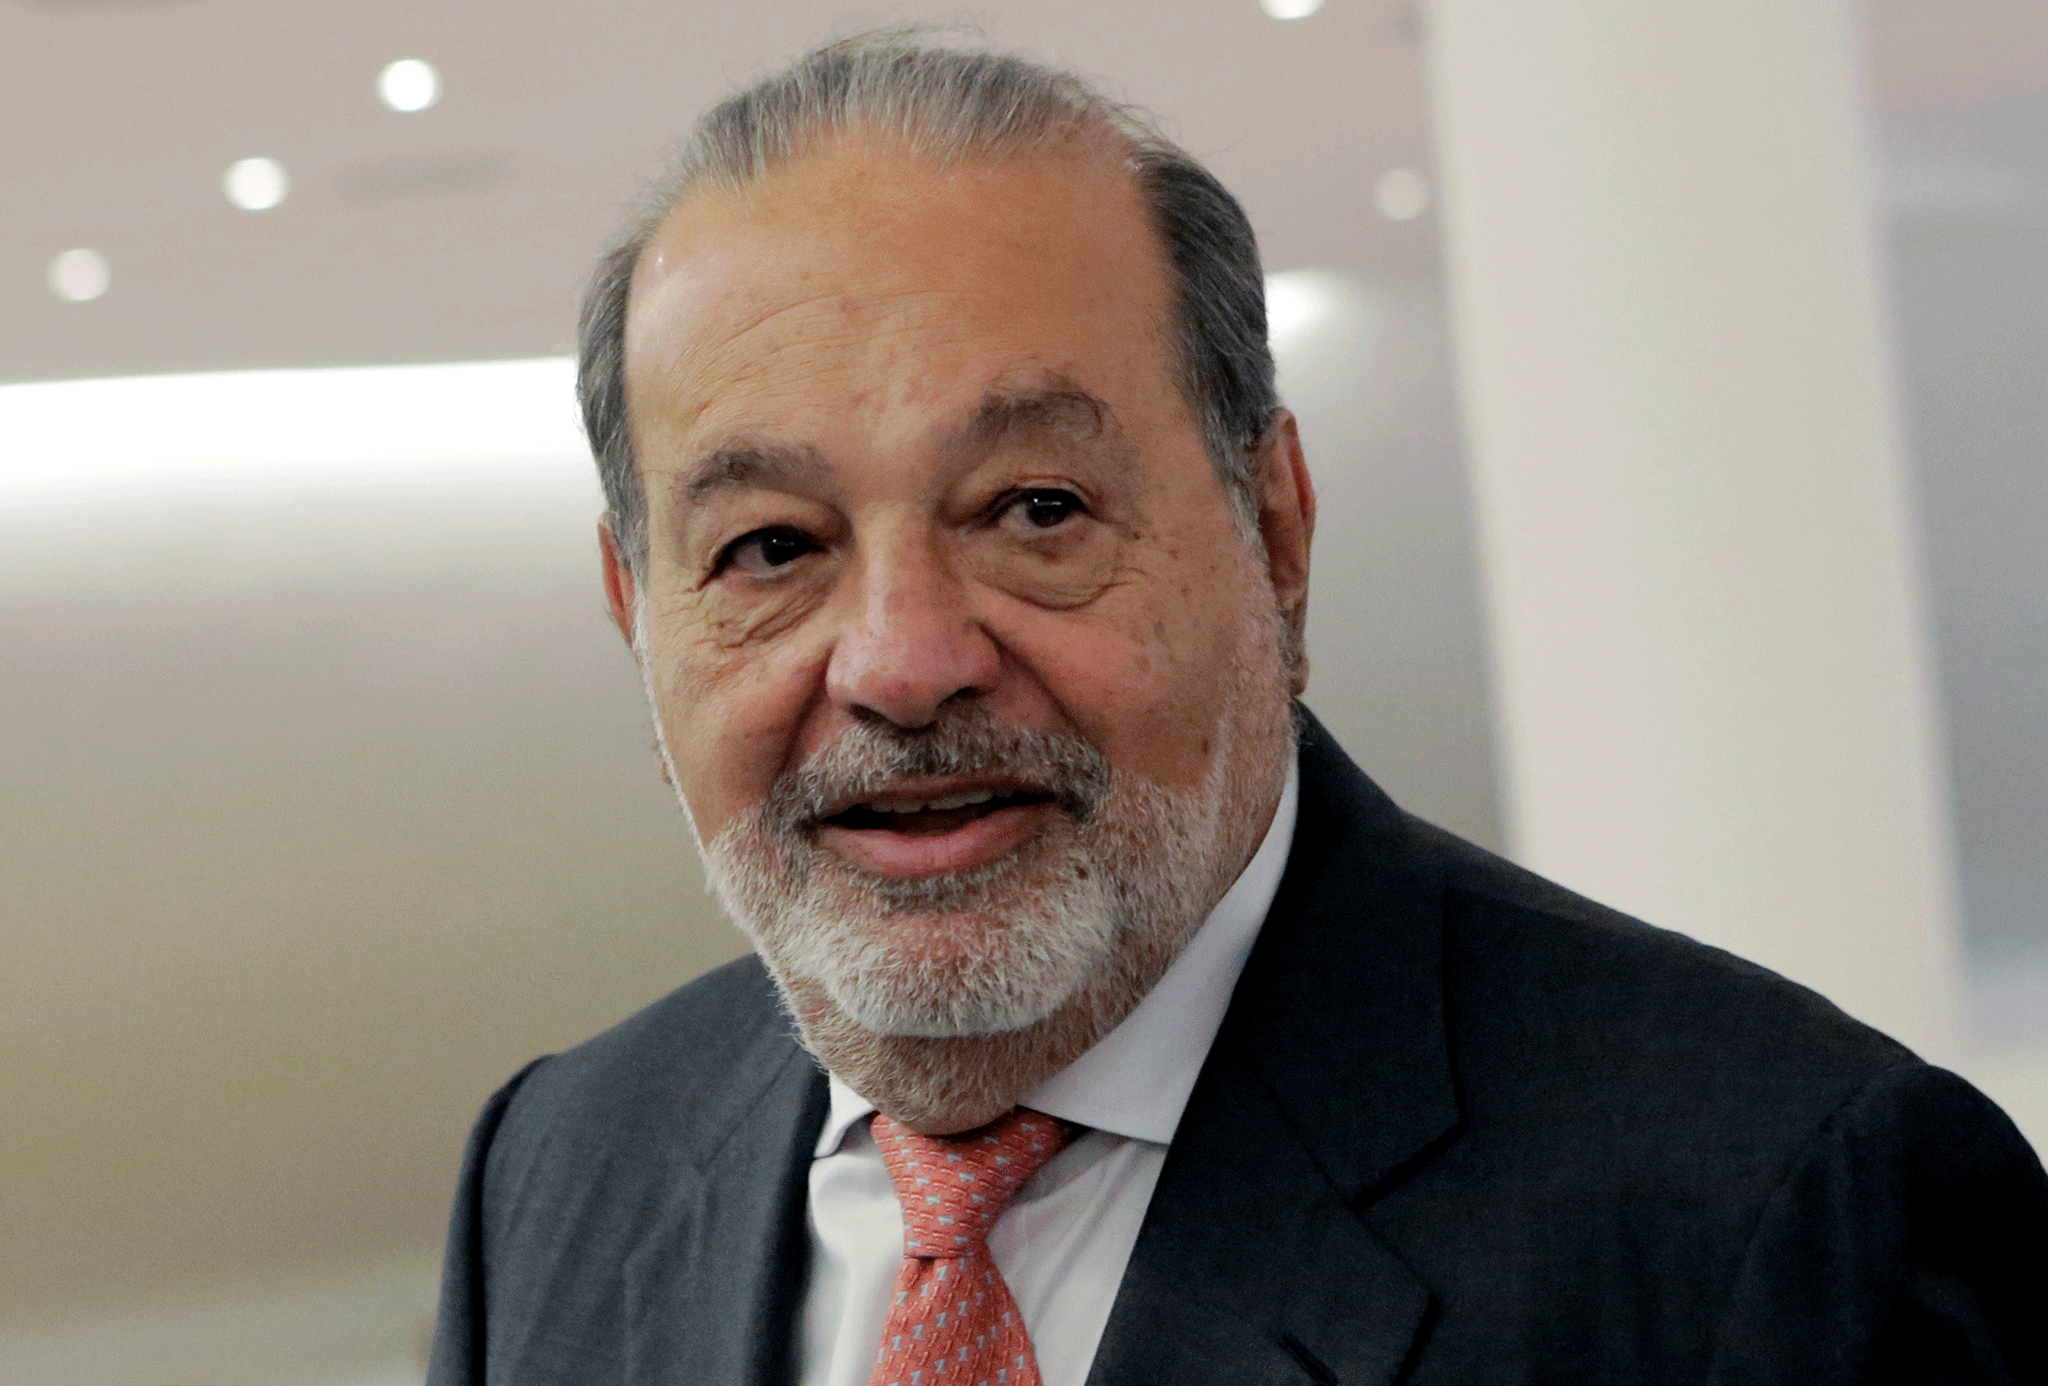 Carlos Slim made his billions in the telecommunications industry as the chairman and chief exectutive of Telmex and America Movil